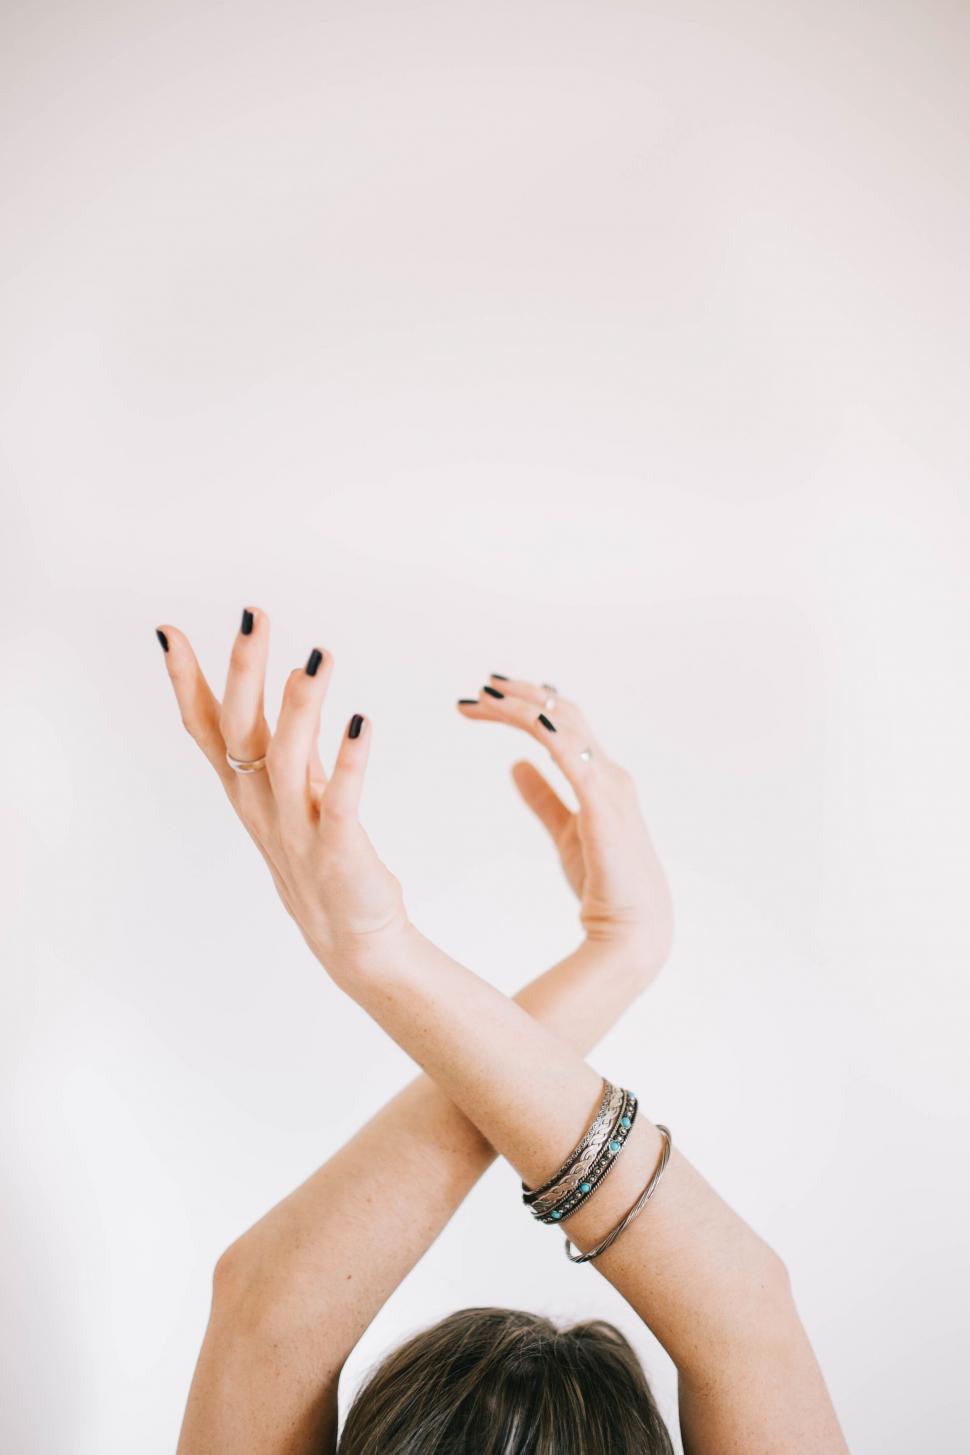 Free Image of Elegant hands raised in a soft backdrop 